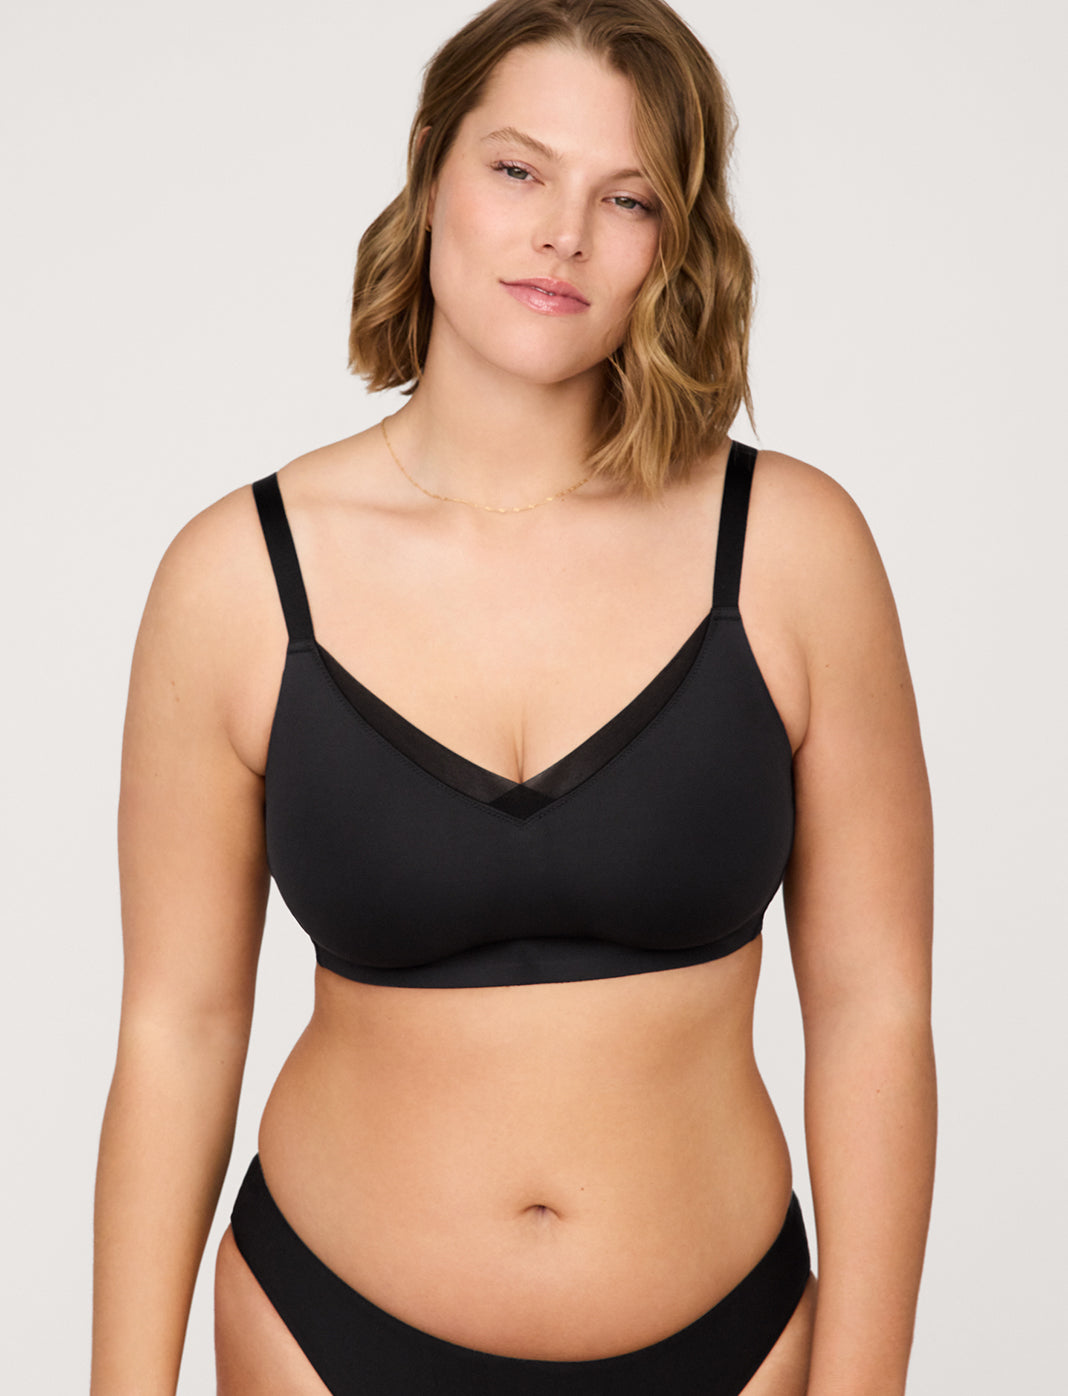 The wireless bra you know and love is on sale. ​ Comment LINK to